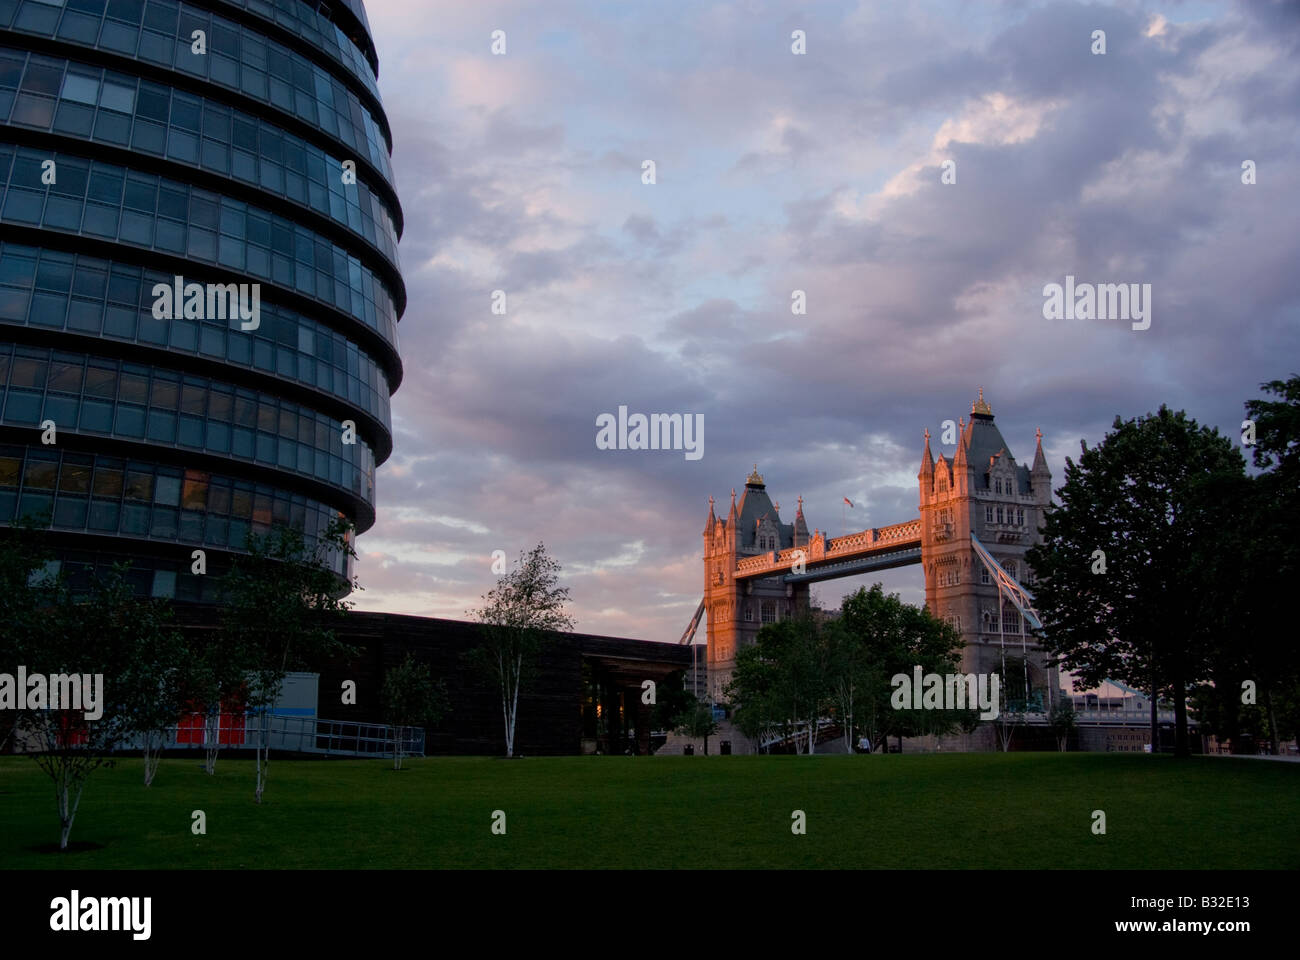 The London City Hall and the Tower bridge near sunset Stock Photo